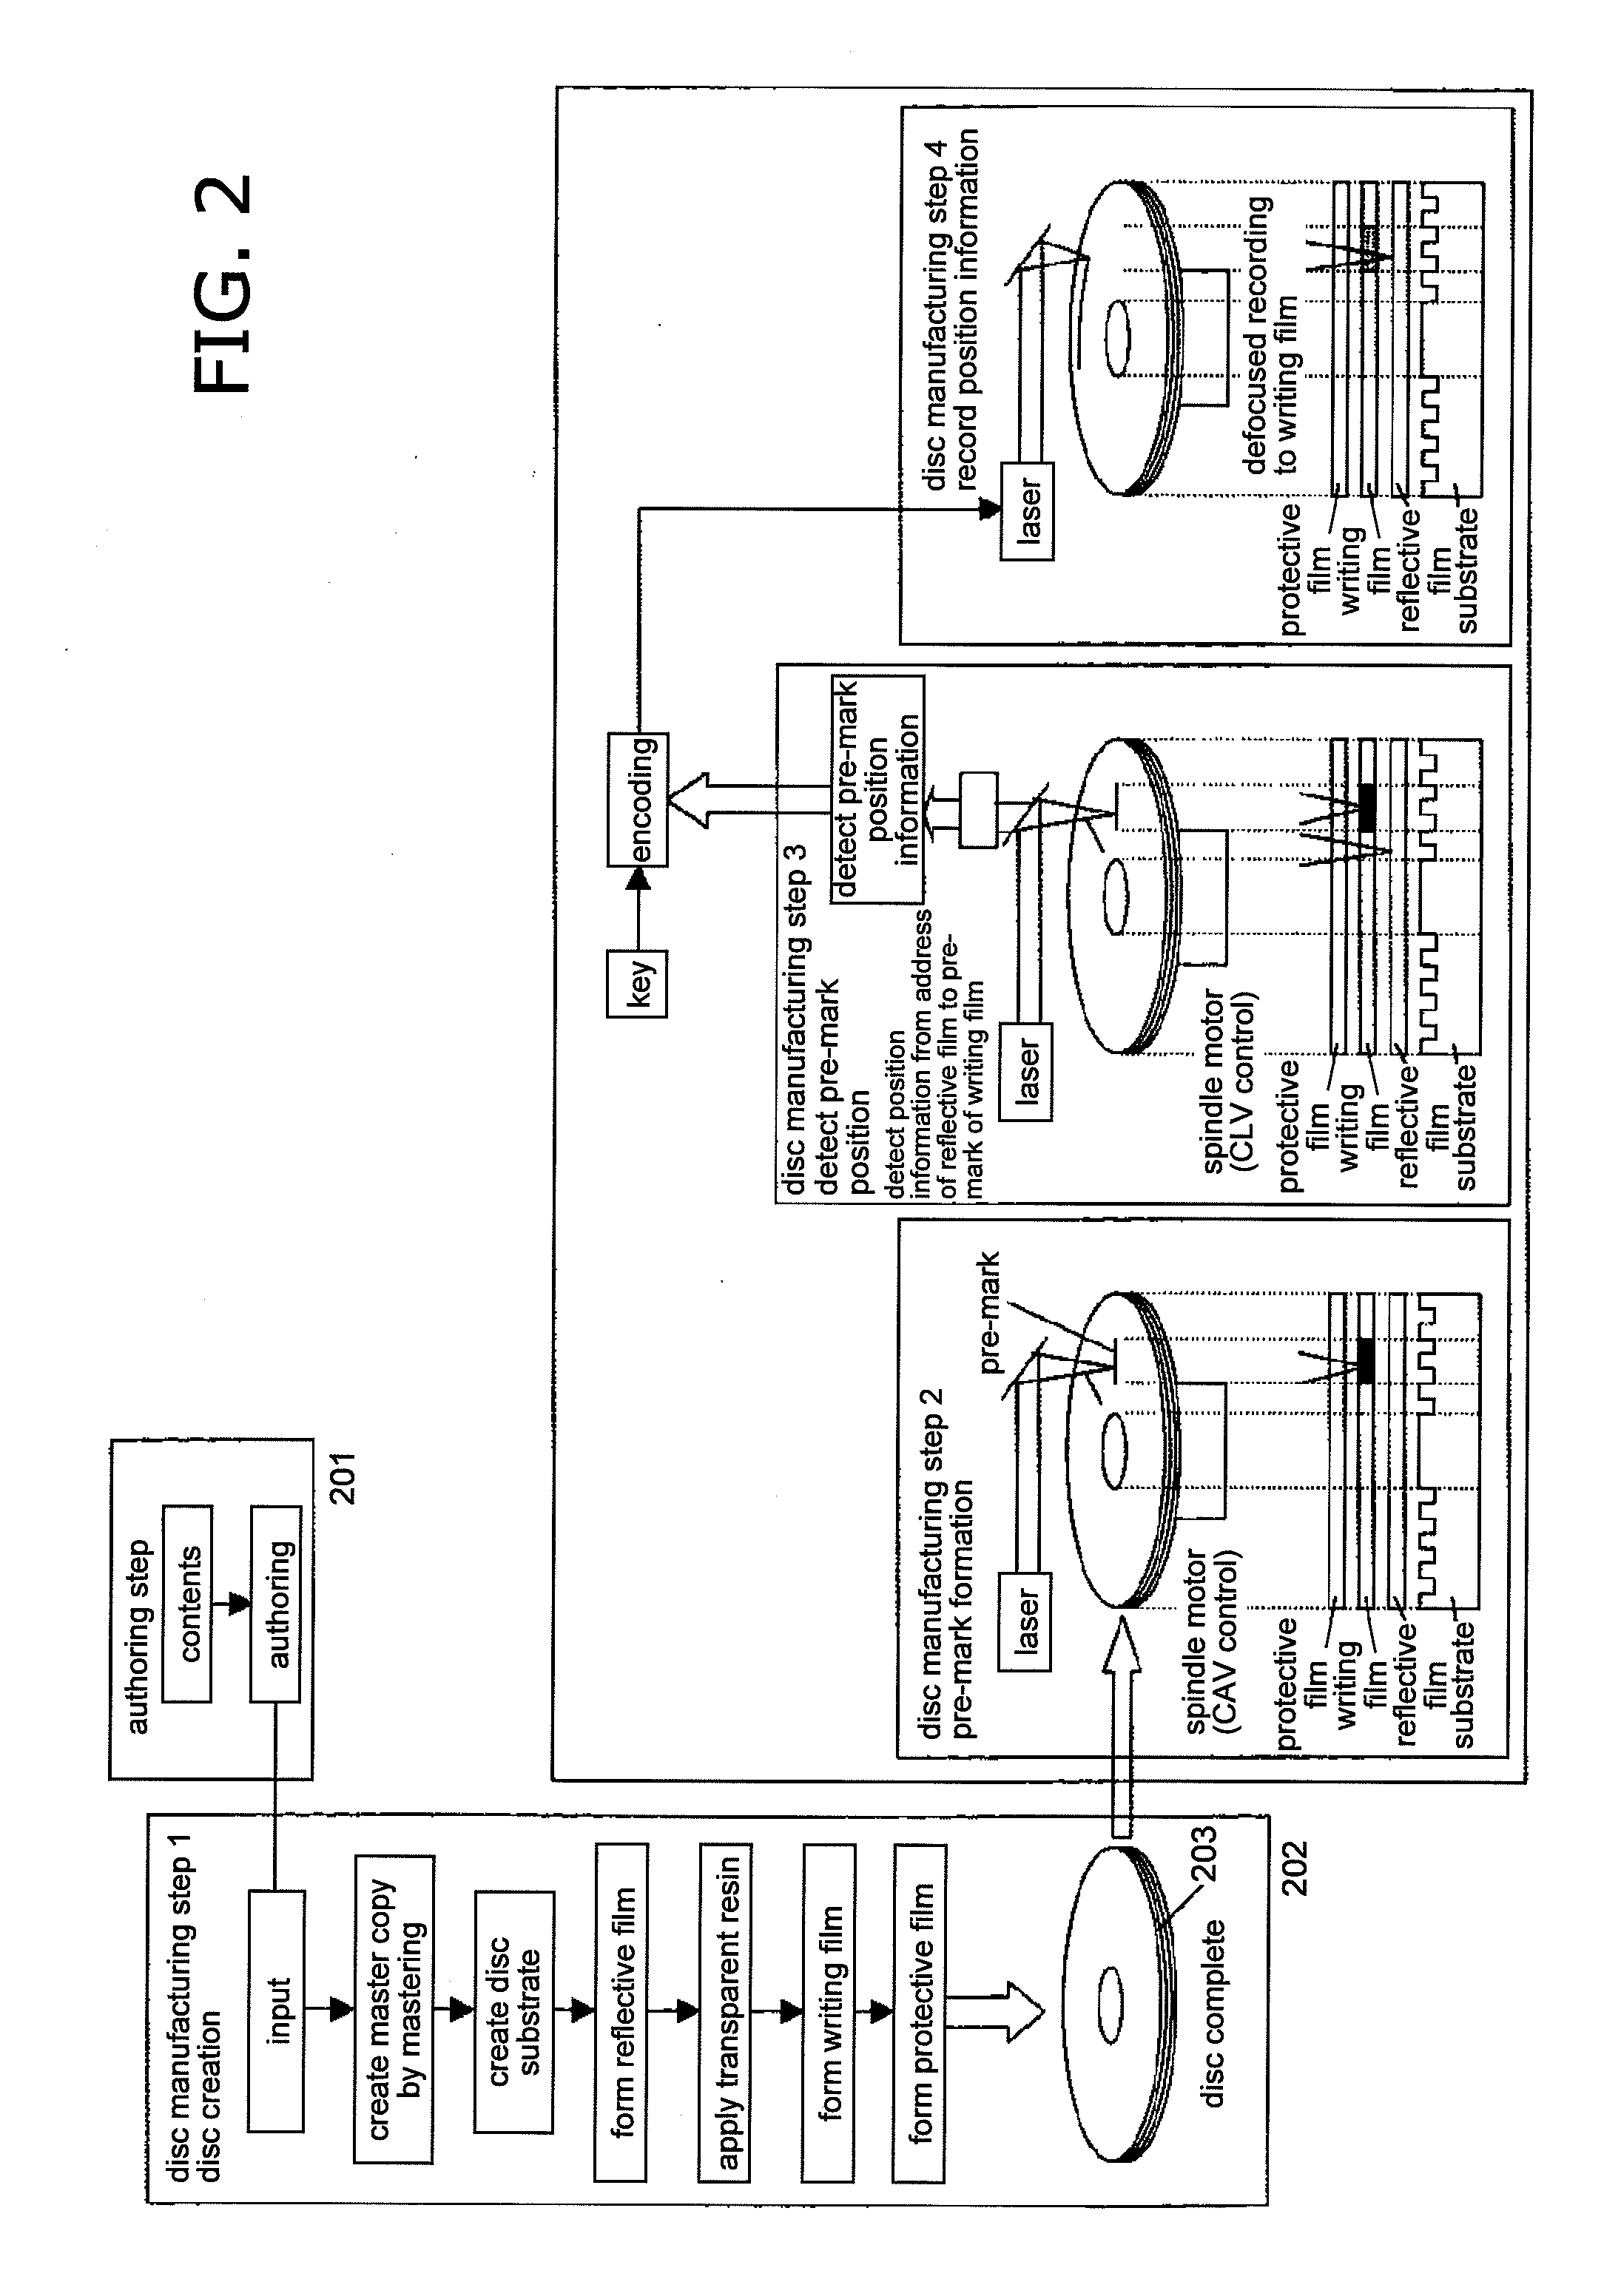 Optical disc, its reproducing device, recording device, manufacturing method, and integrated circuit